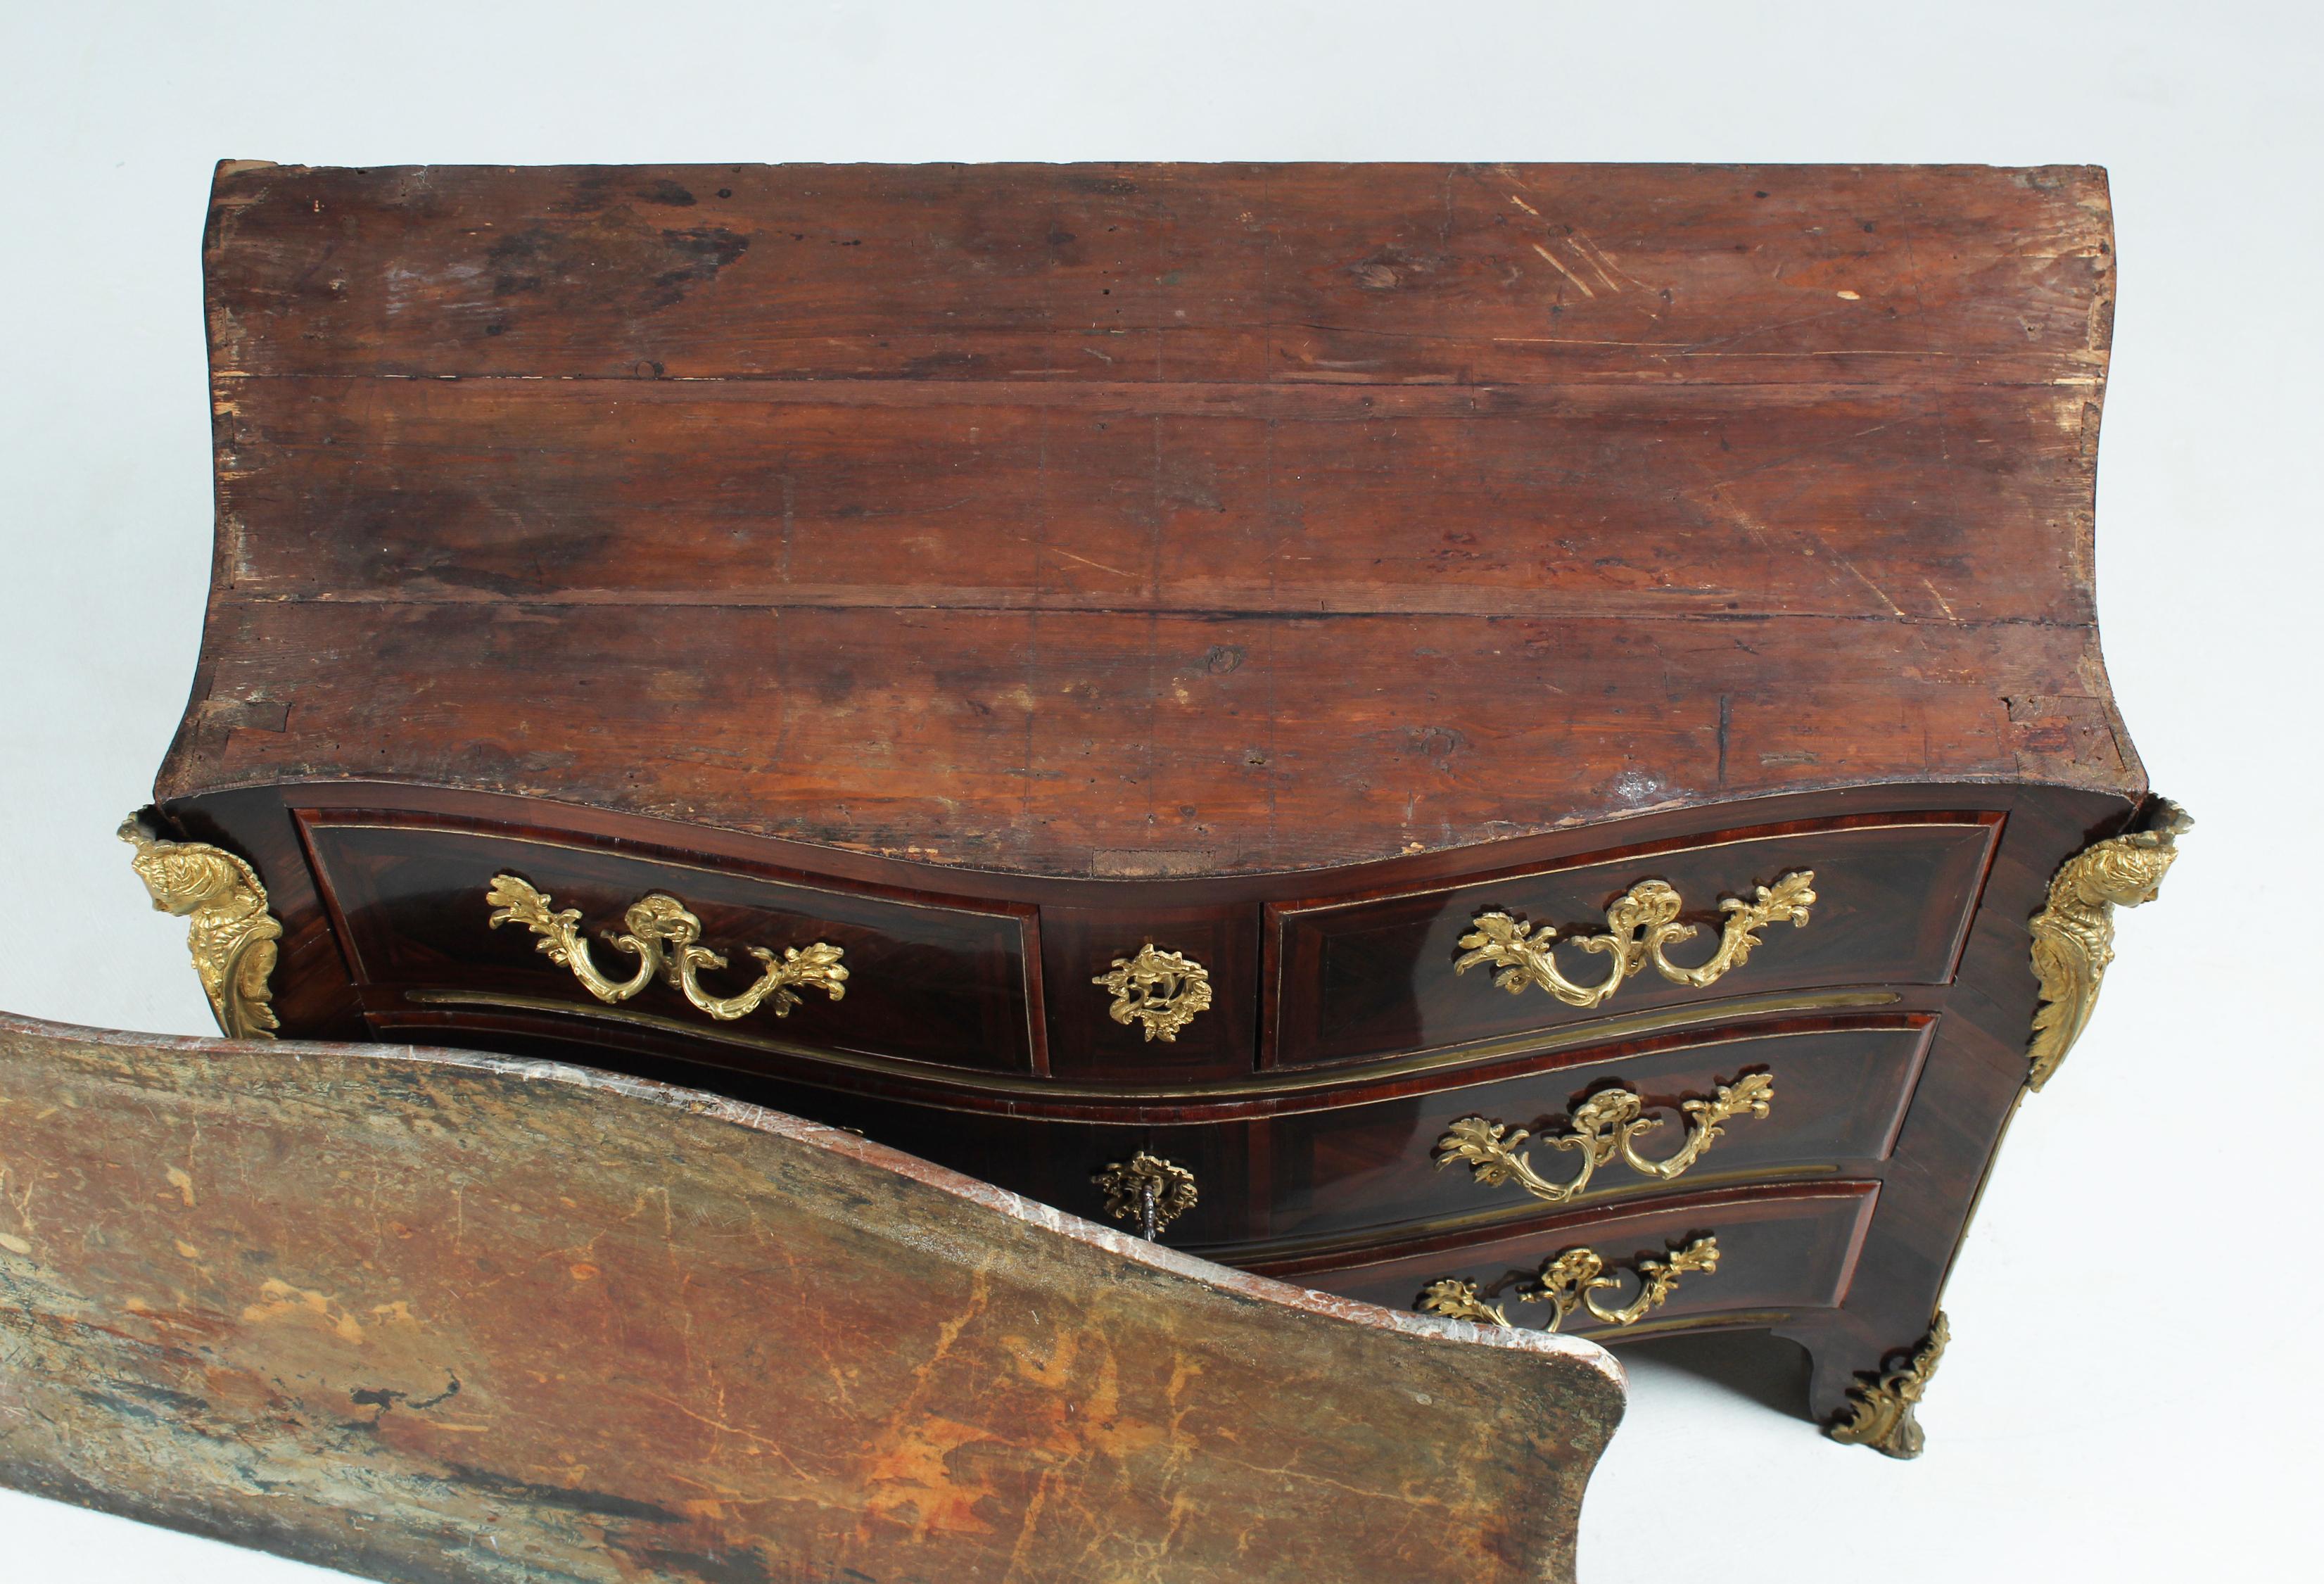 French Regence Chest of Drawers with Ormolu Fittings, Early 18th Century For Sale 9